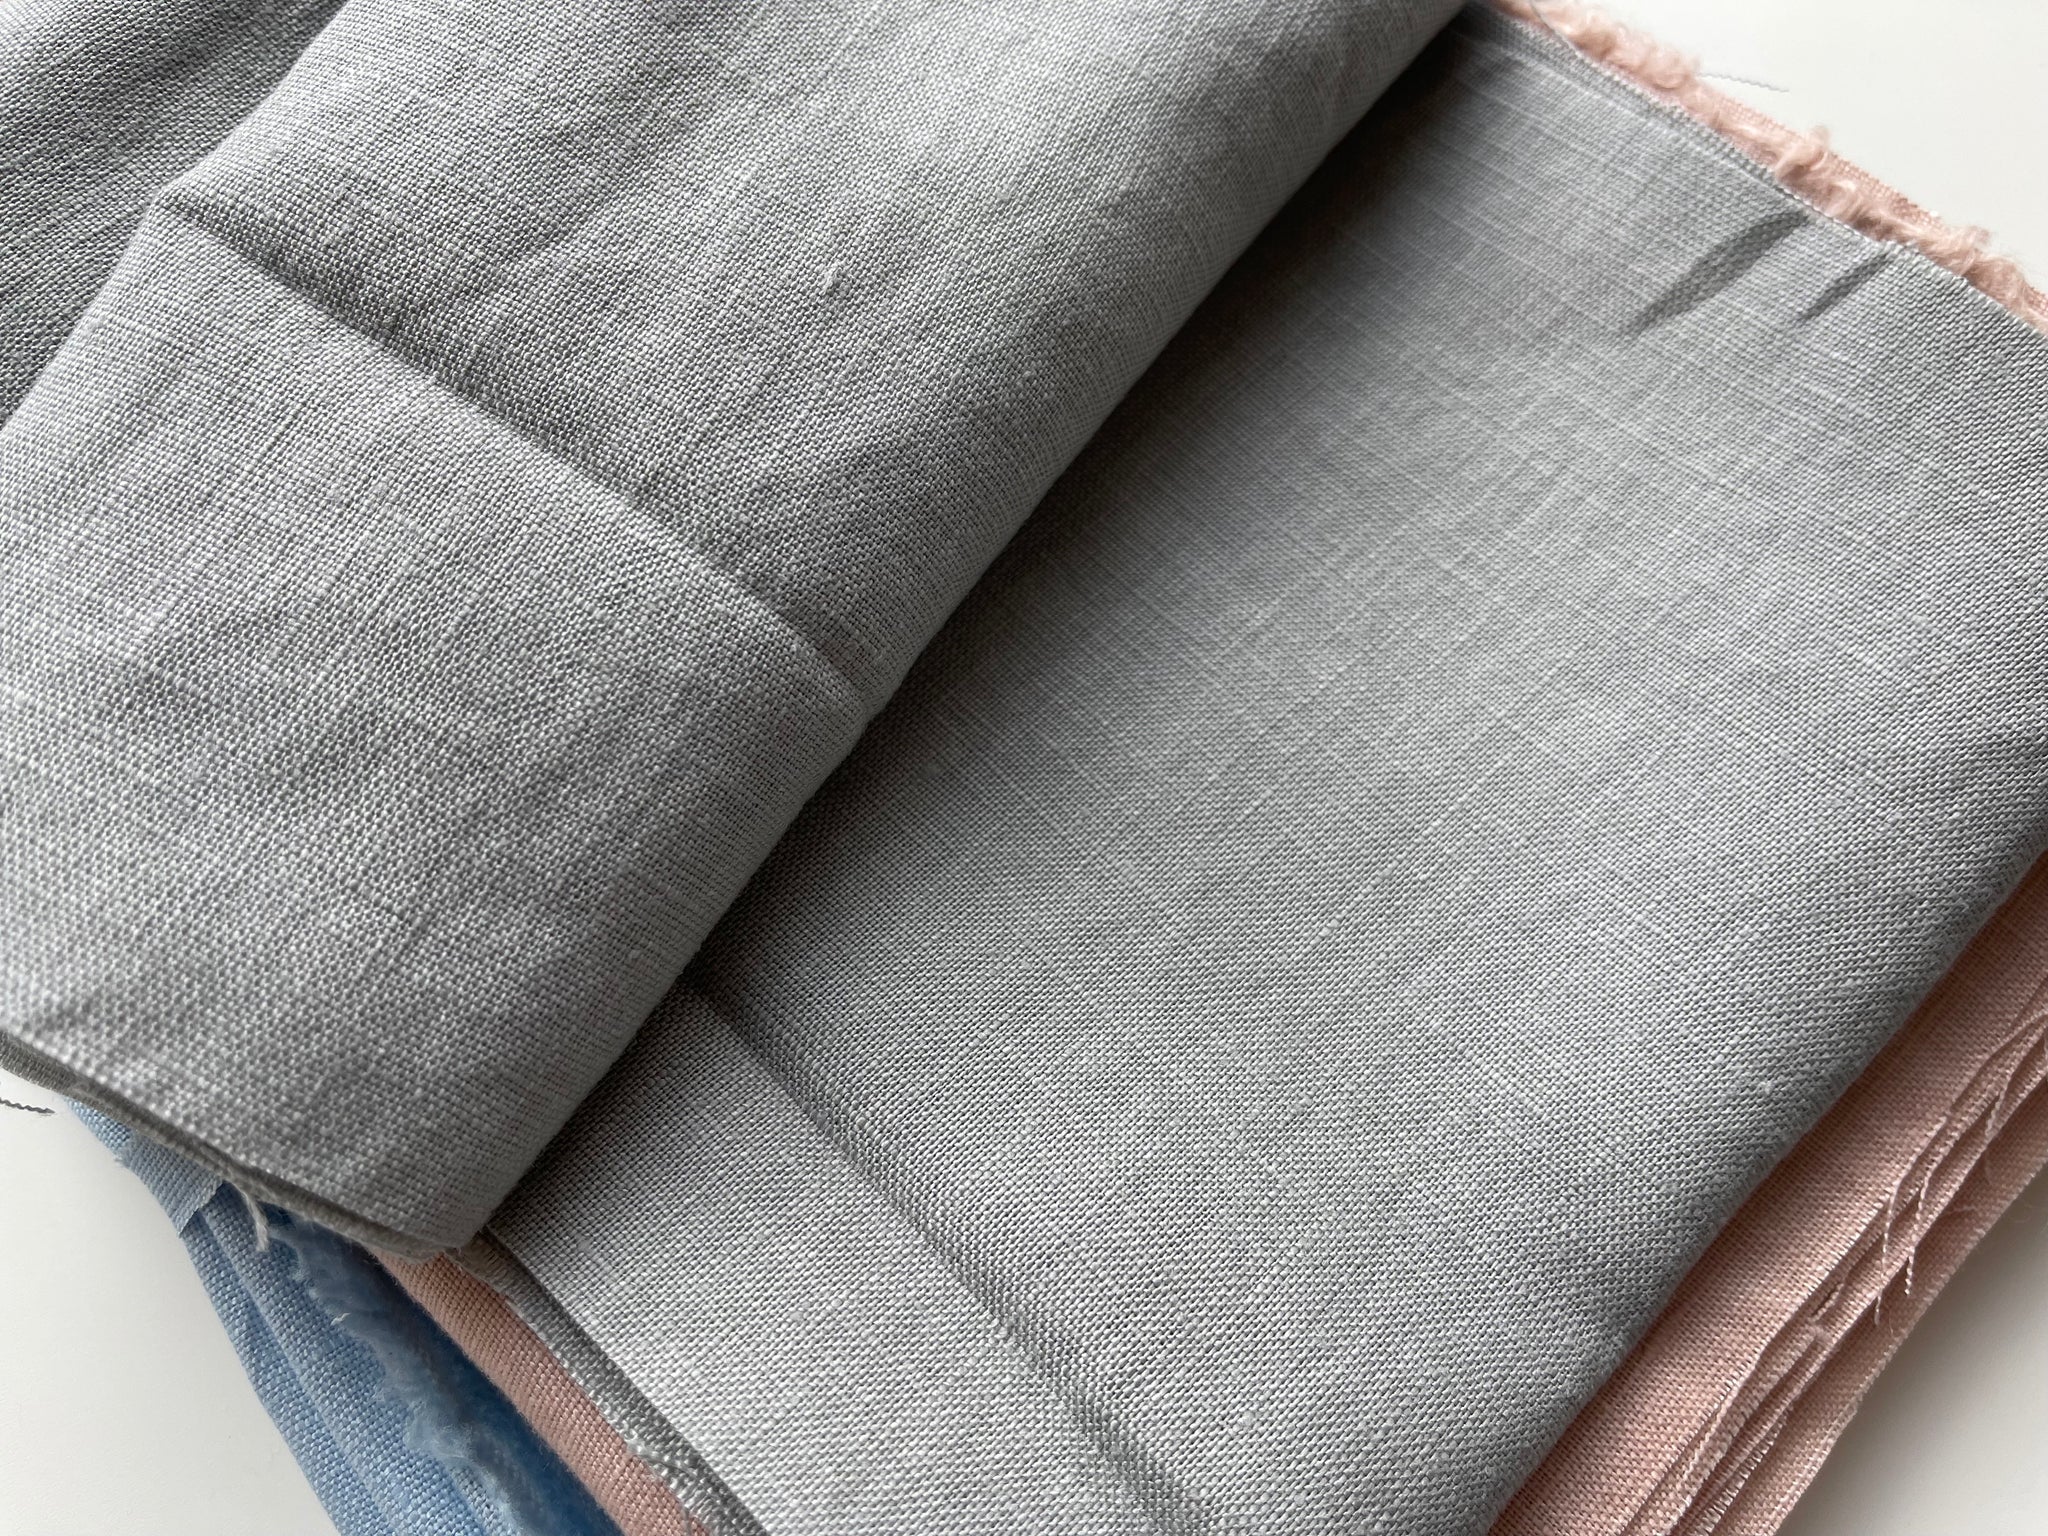 Linen Fabric Remnants - Light Blue, Dusty Rose and Grey